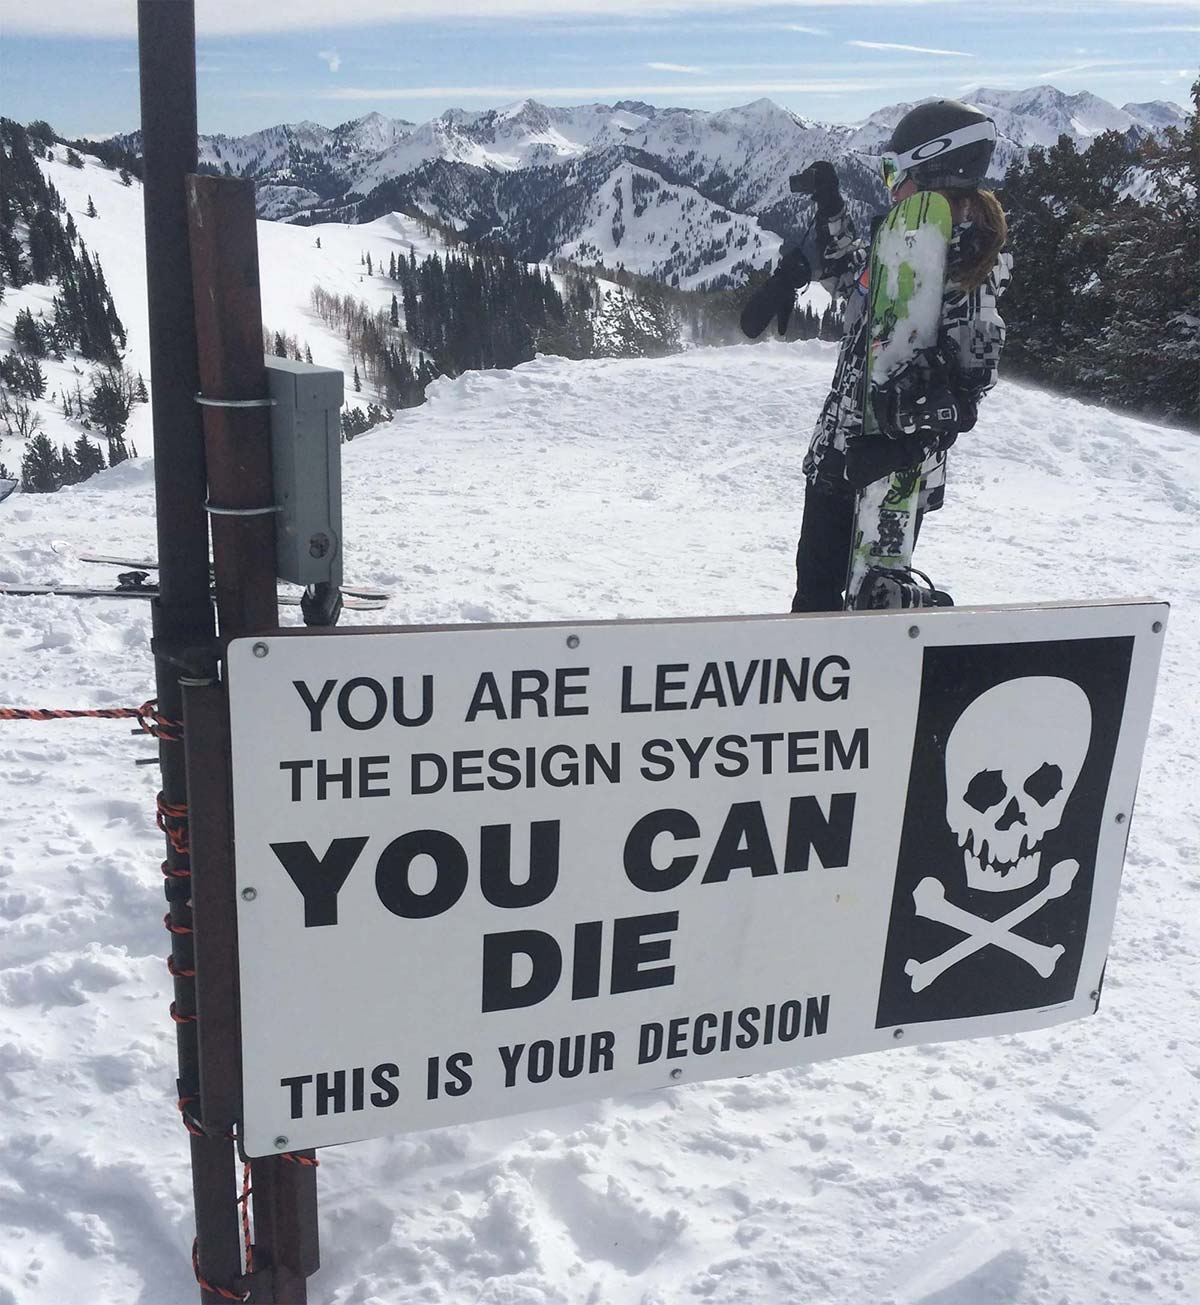 A photograph of a sign on a ski slope with a skull and bones which has been Photoshopped to say (in all caps) “You are leaving the design system. You can die. This is your decision.”